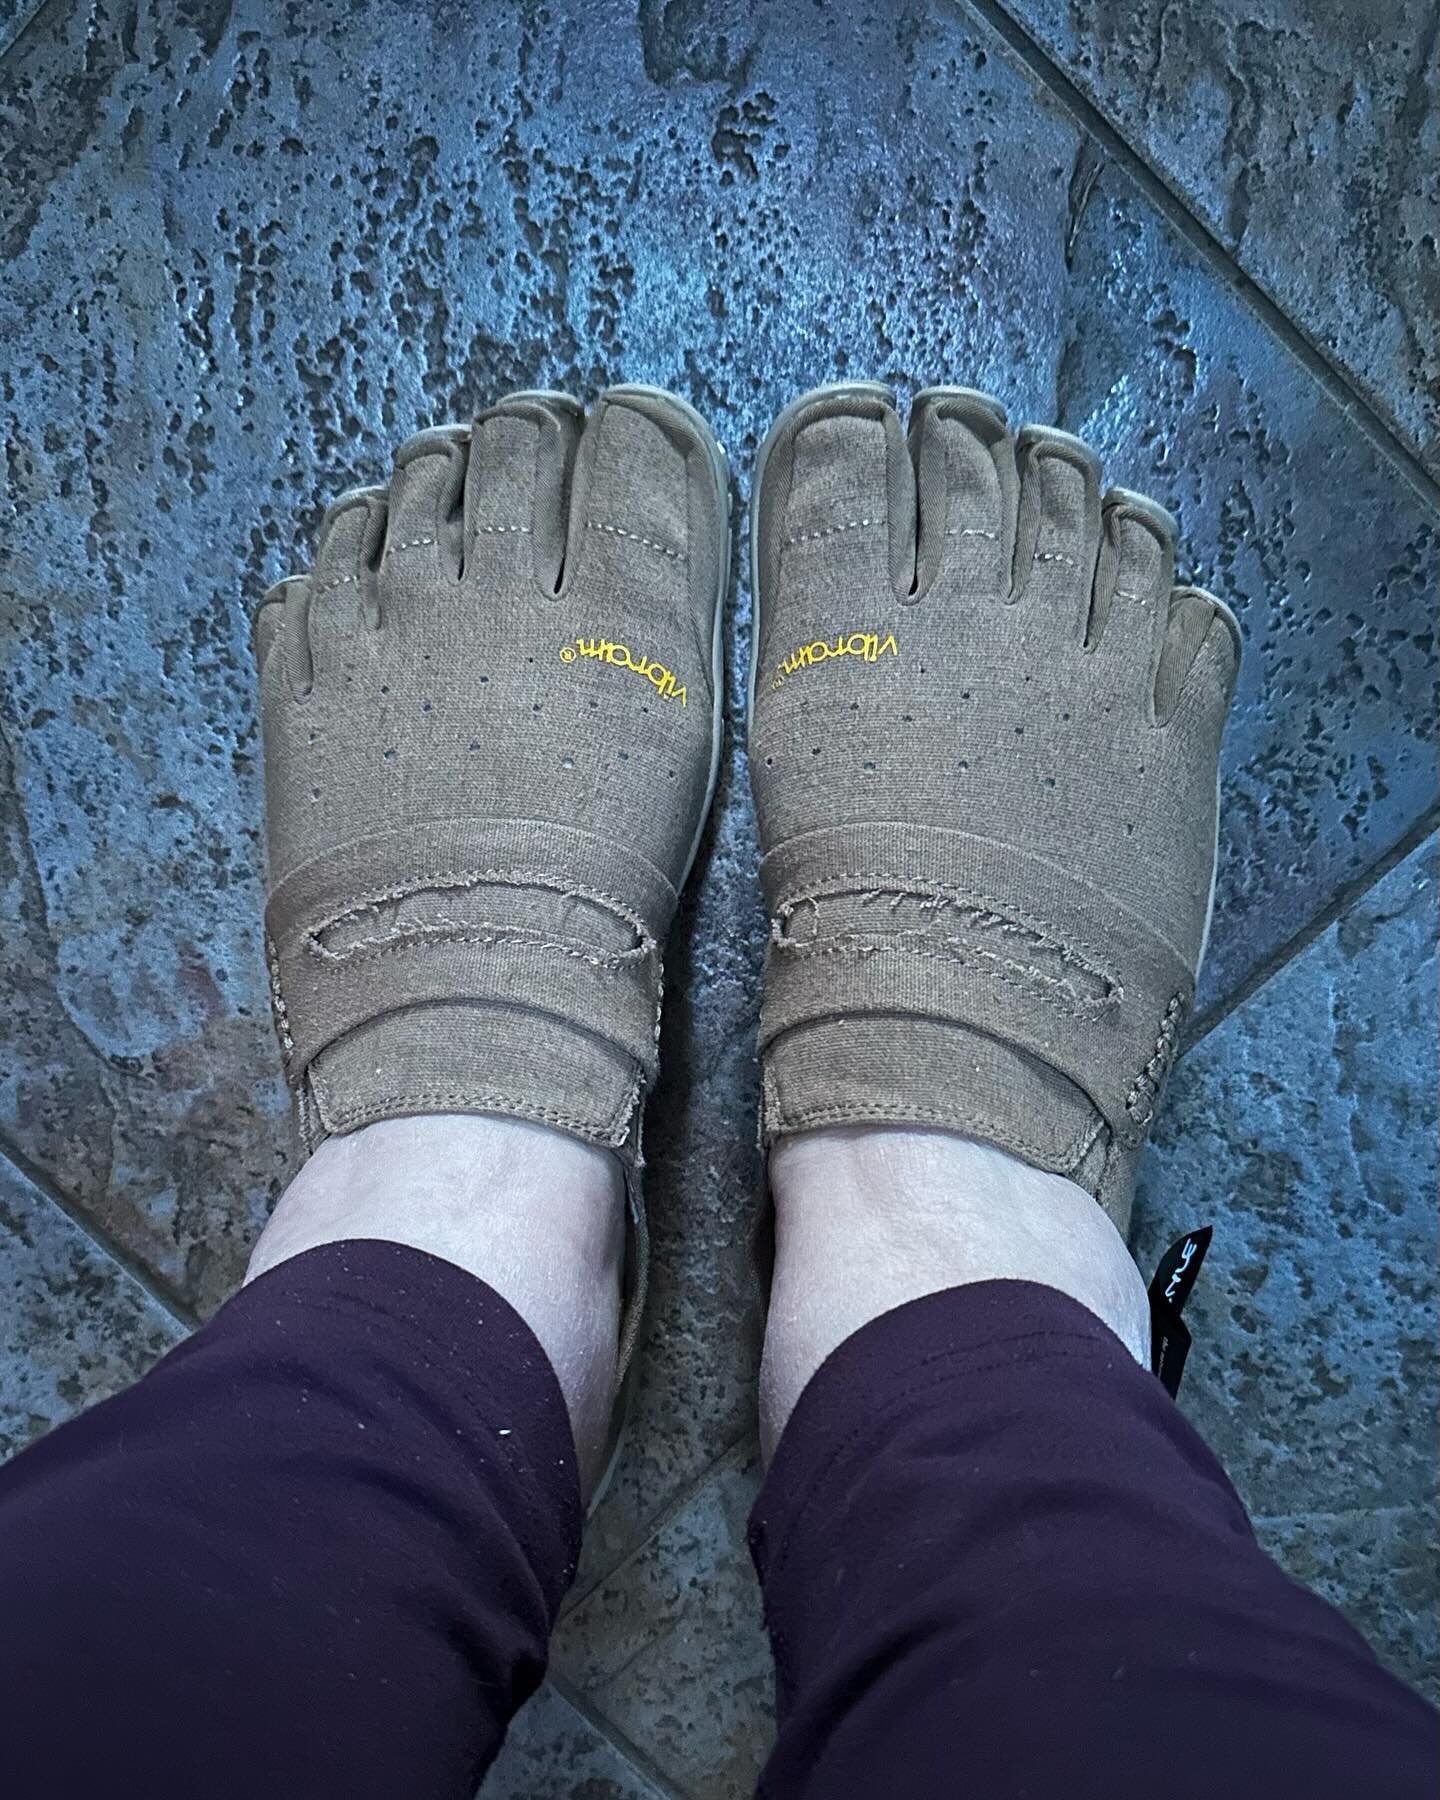 Meet the new casual Sandle/slipper/around the farm/kitchen/house footwear.  These vibram Sole &lsquo;foot gloves&rsquo; arrived too late for my Oaxacan adventure, but just in time for the rest of my life!!! I&rsquo;m slowly coming out of a strained b